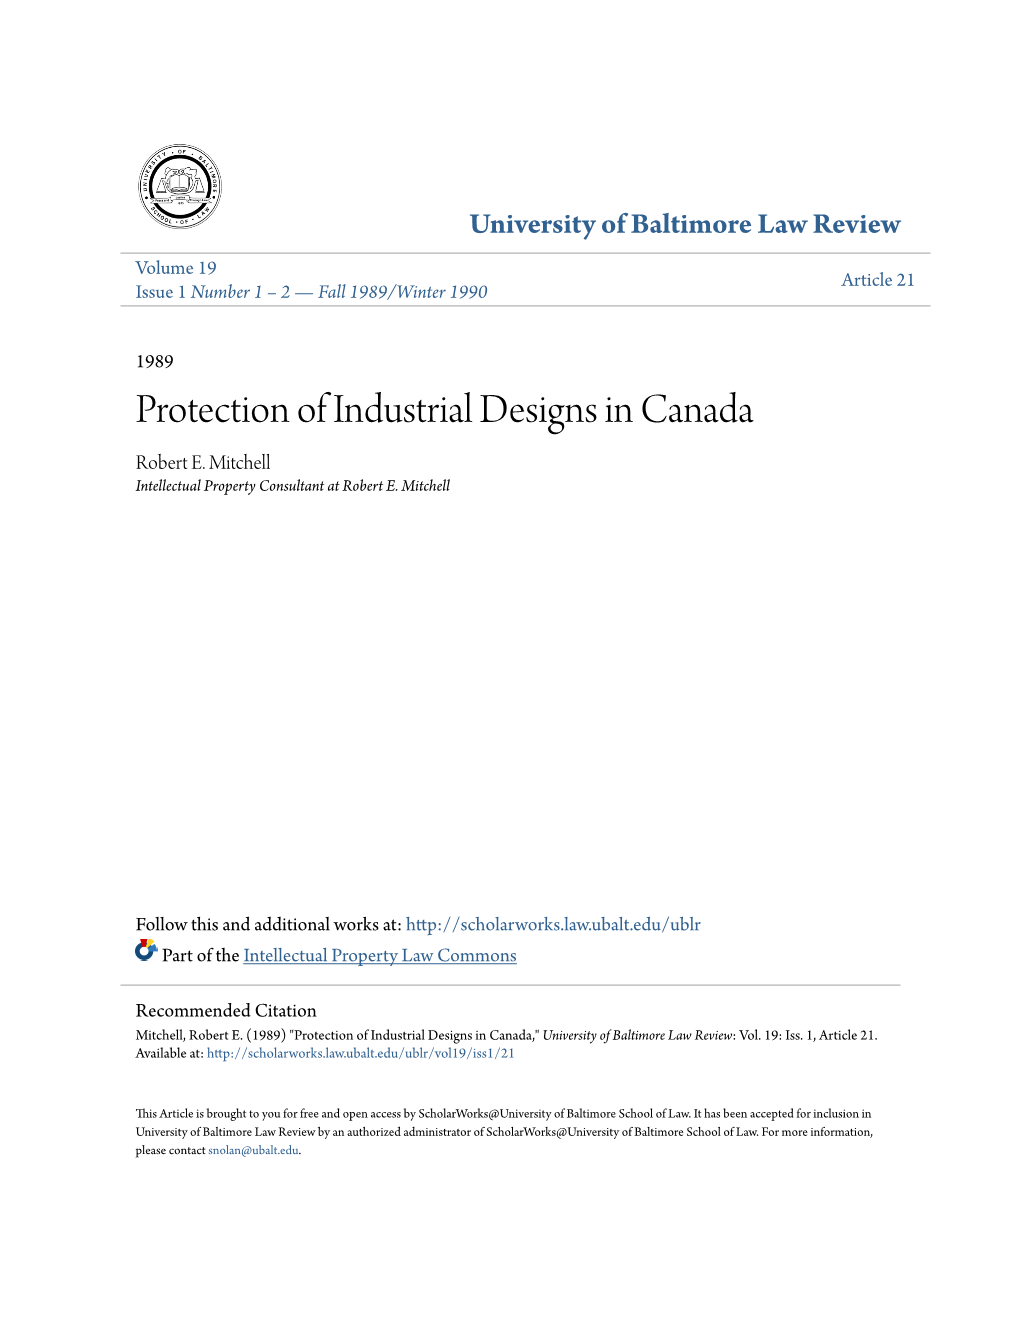 Protection of Industrial Designs in Canada Robert E